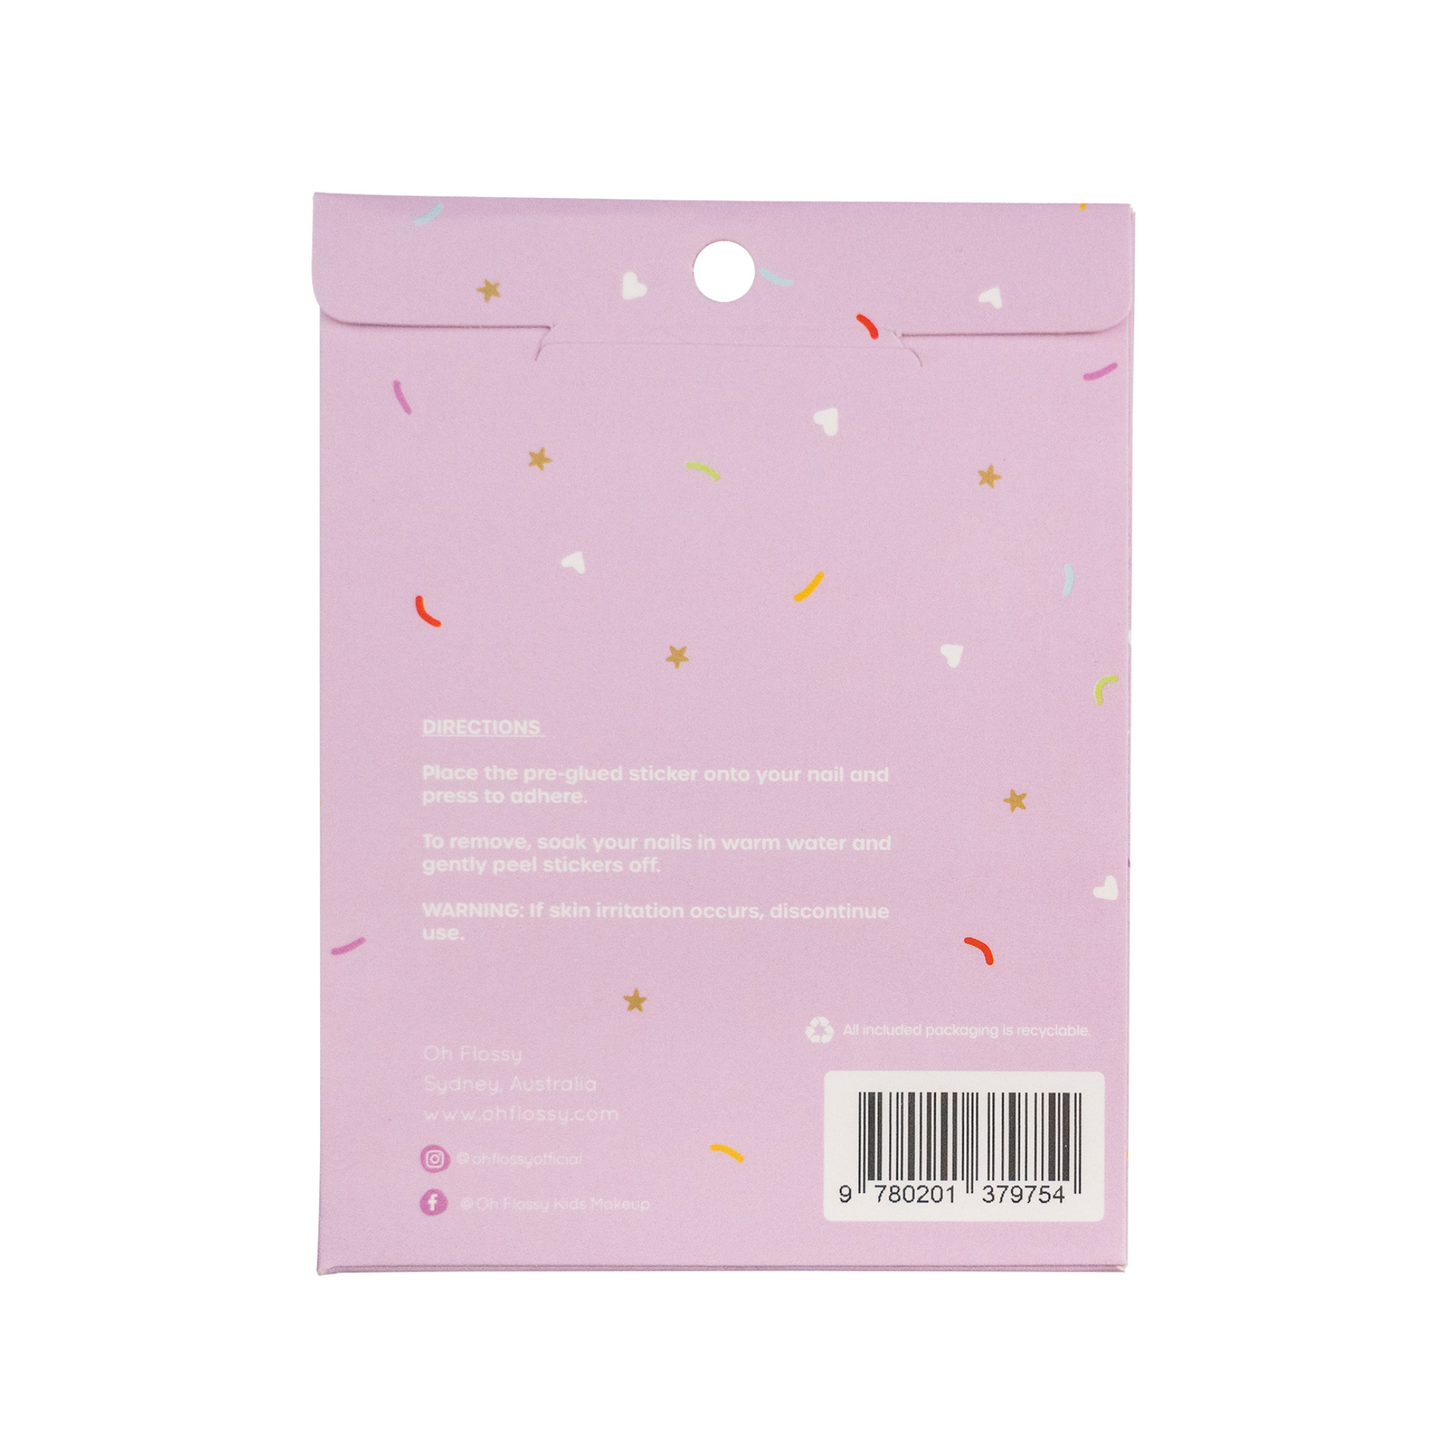 Oh Flossy Nail Stickers - Sweets